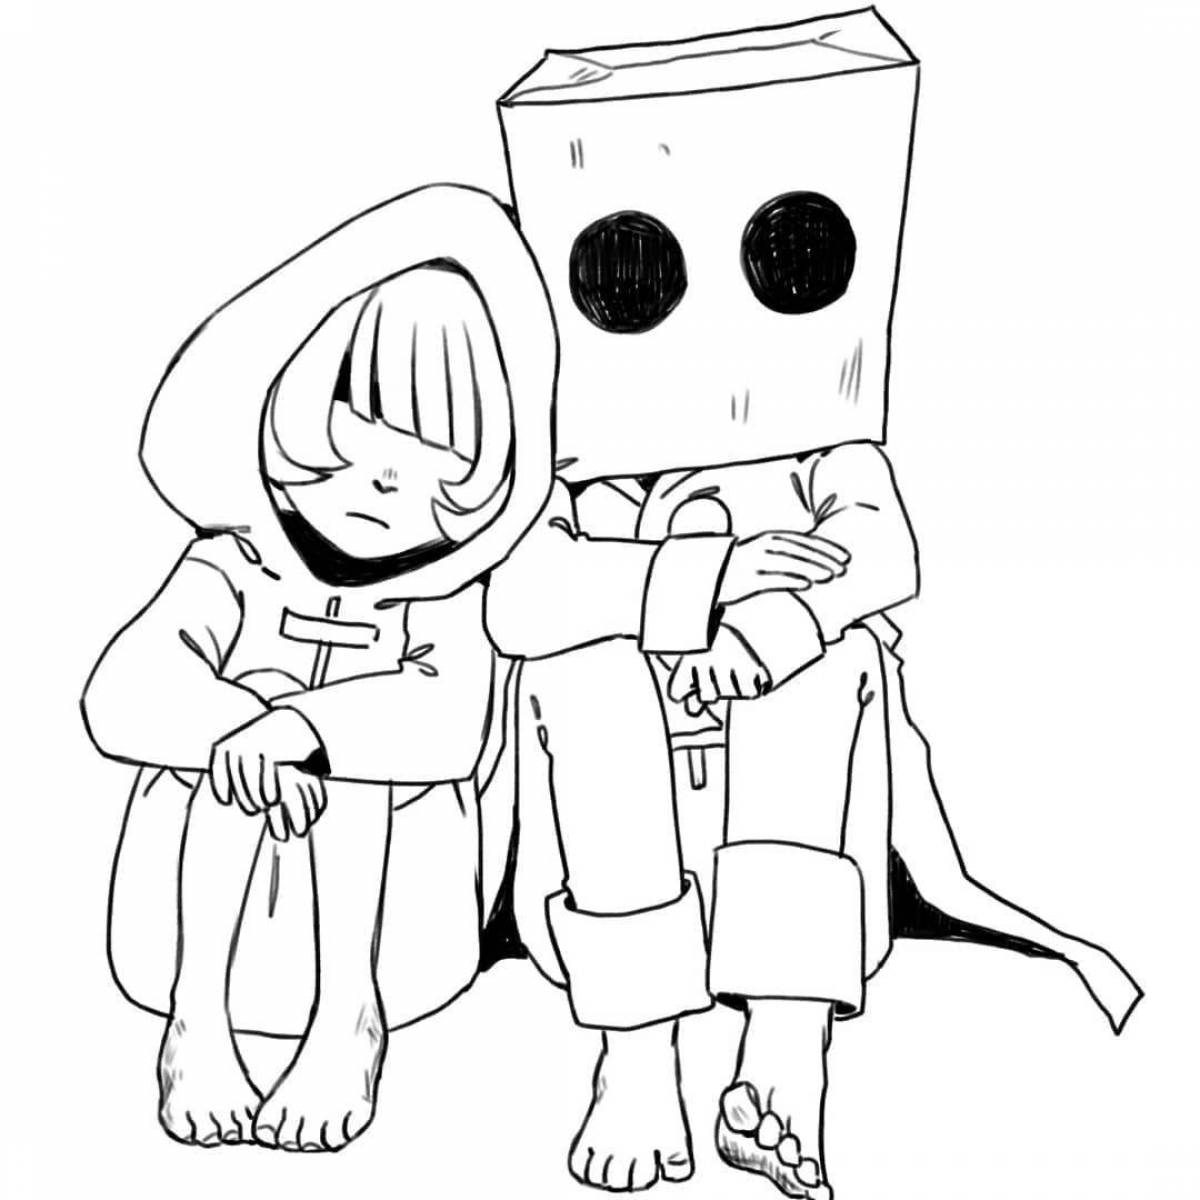 Gorgeous little nightmares coloring page